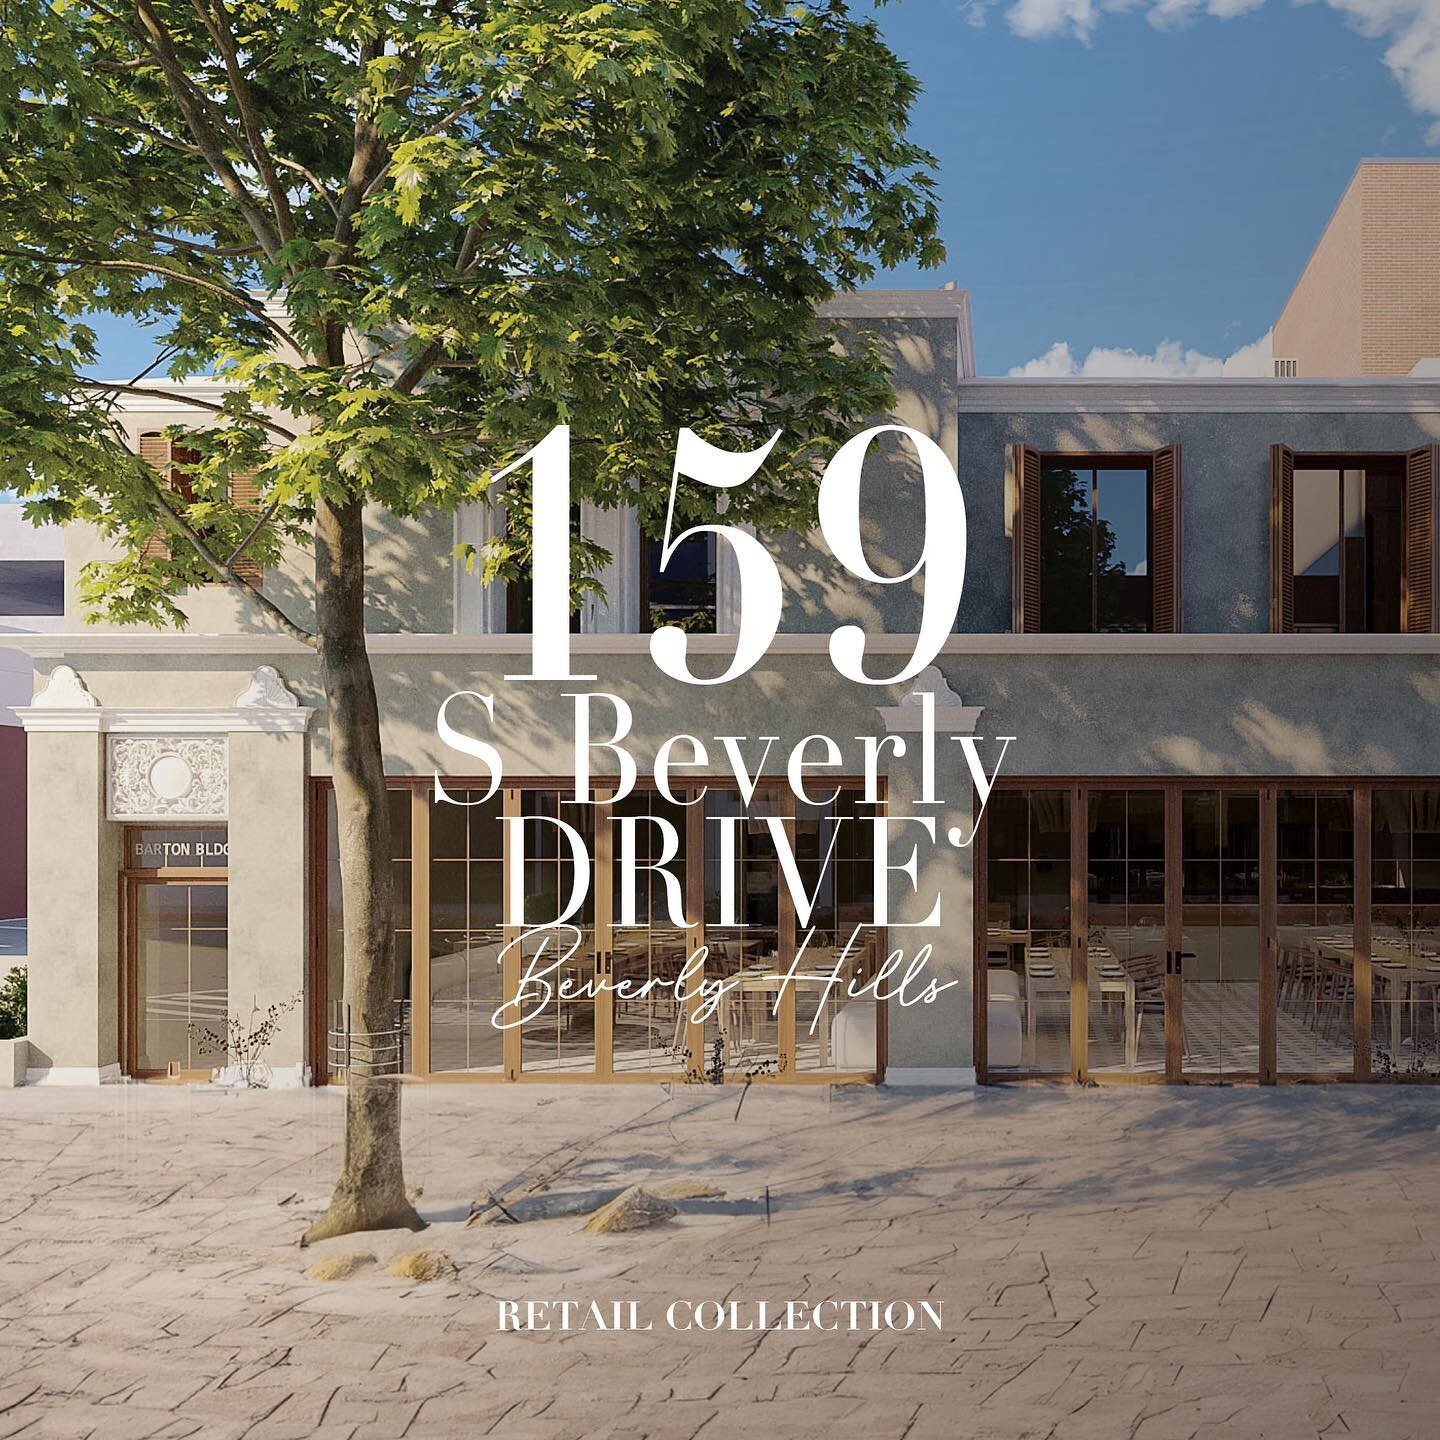 Now Available For Lease // High-street Beverly Hills Opportunity: Retail | Restaurant | Private Club
One of a kind 2 story, build to suit space

@jakezacuto @leor_s_b @andrewsinasohn @benkay6